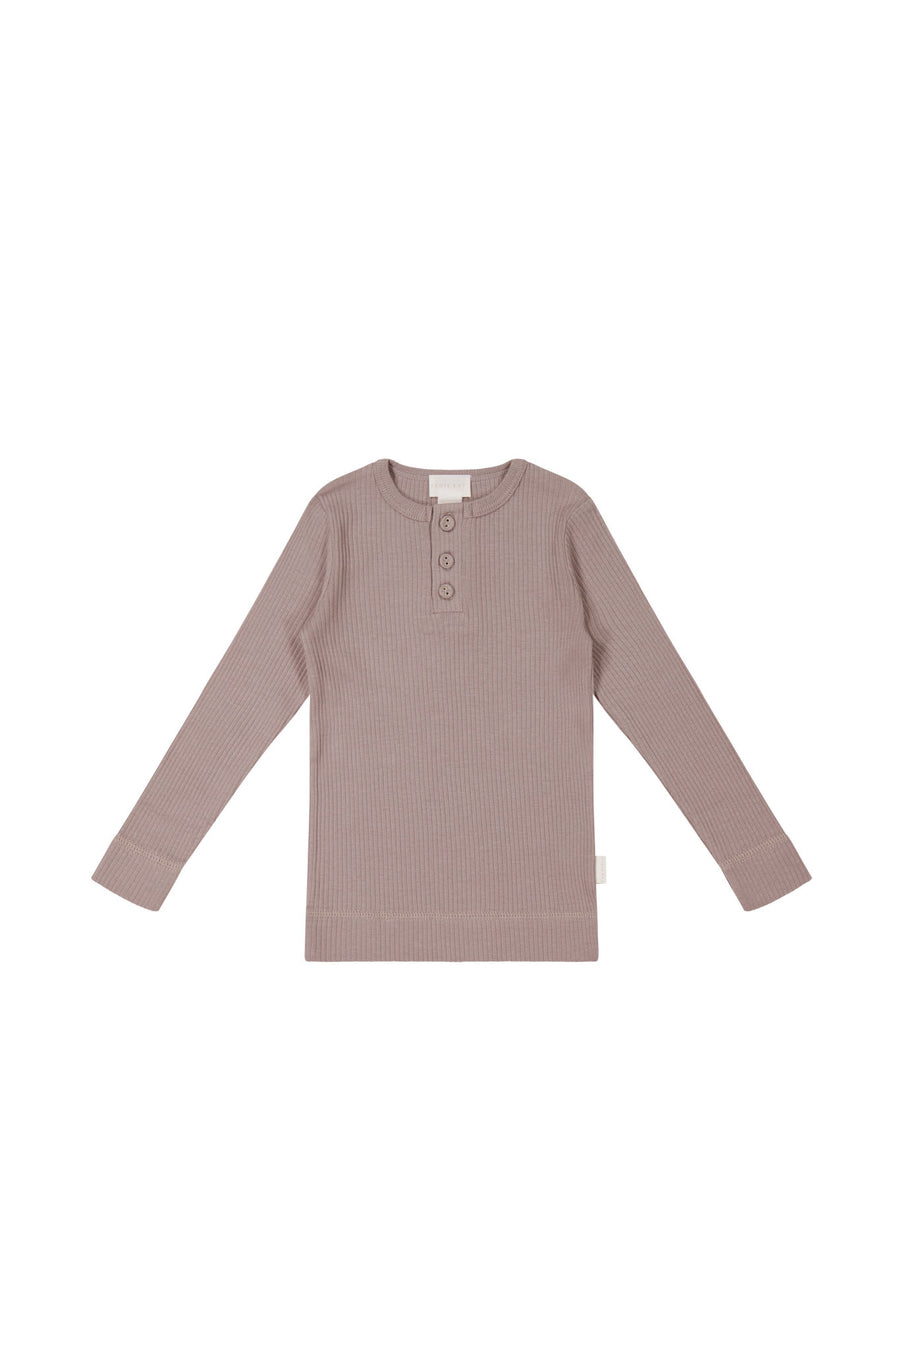 Organic Cotton Modal Long Sleeve Henley - Mauve Shadow Childrens Top from Jamie Kay NZ